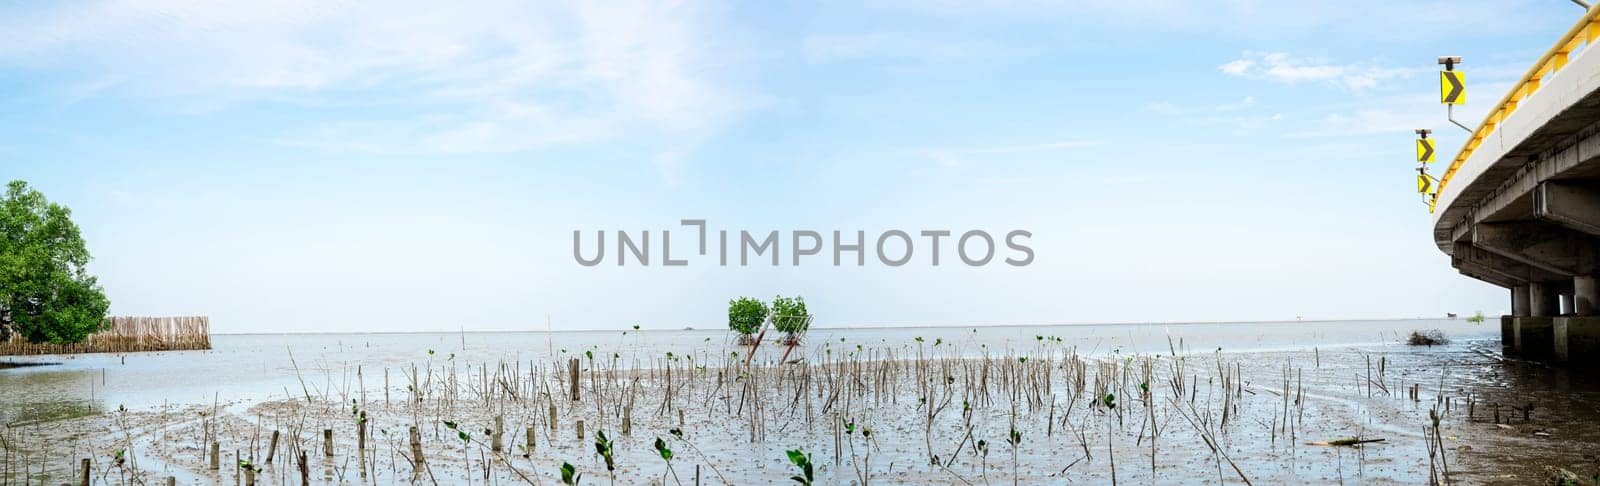 Green mangrove tree planting in mangrove forest. Mangrove ecosystem. Natural carbon sinks. Mangroves capture CO2 from the atmosphere. Blue carbon ecosystems. Mangroves absorb carbon dioxide emissions. by Fahroni